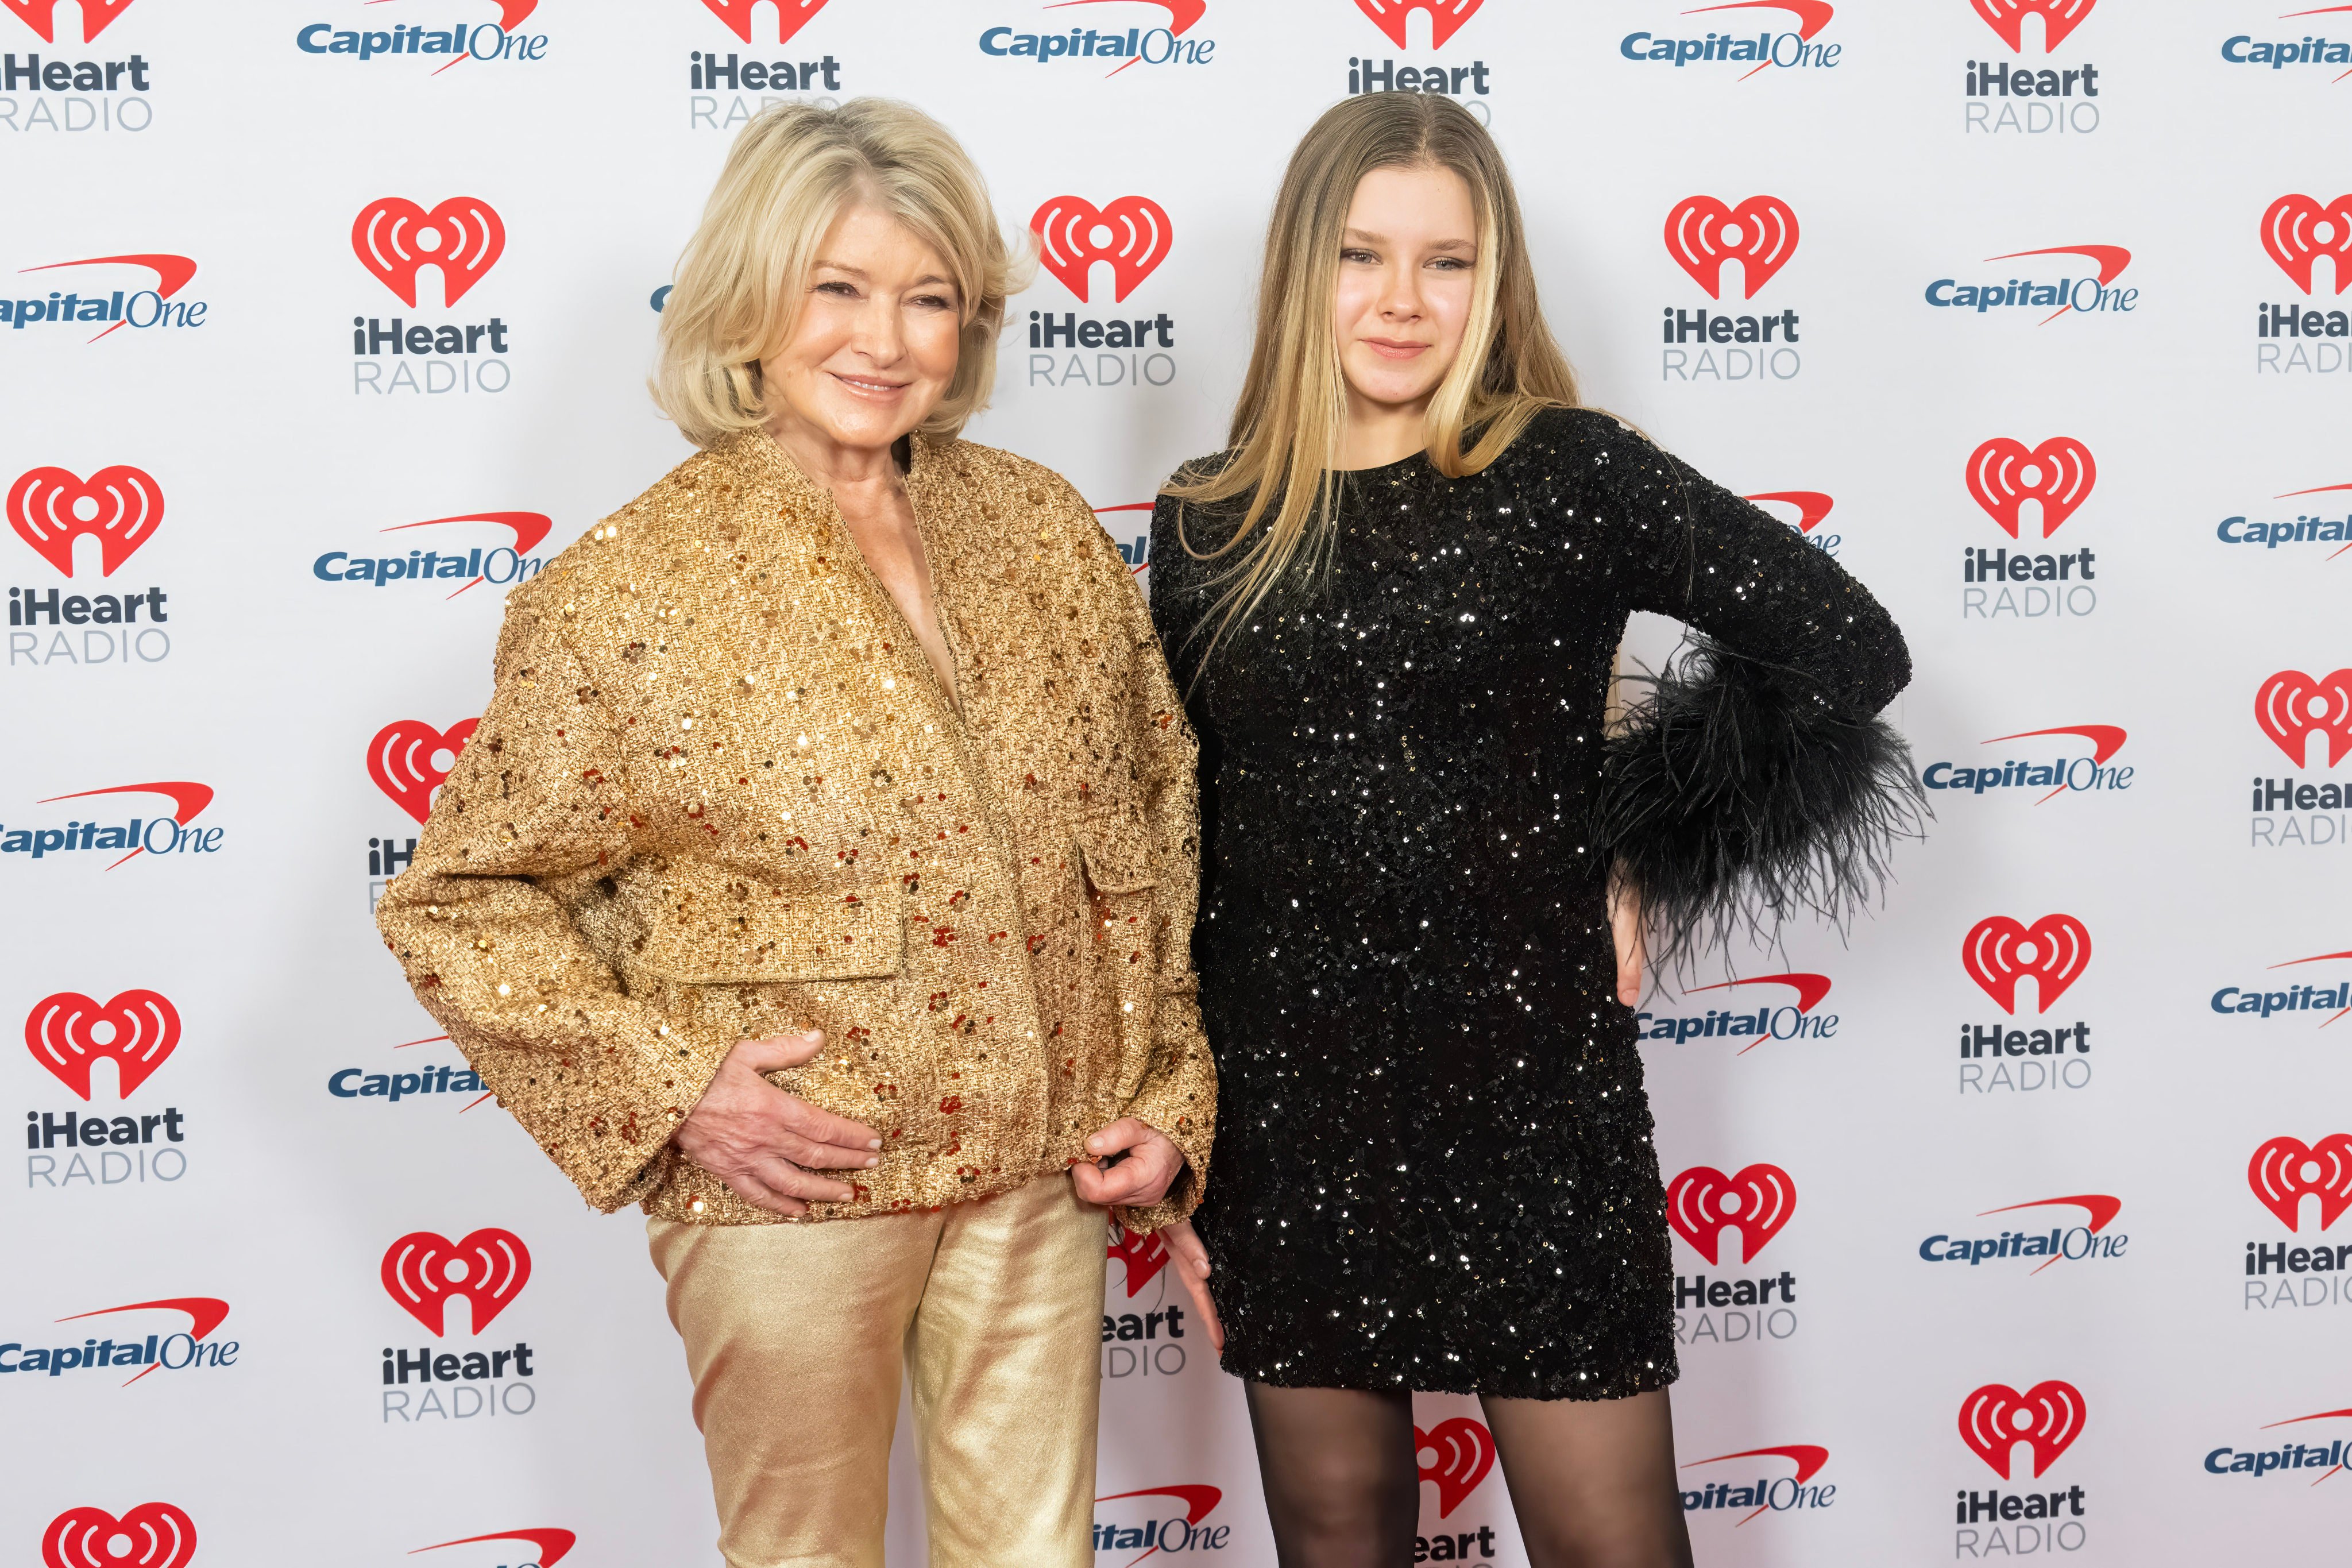 Martha Stewart's daughter: All about Alexis and her 2 grandkids